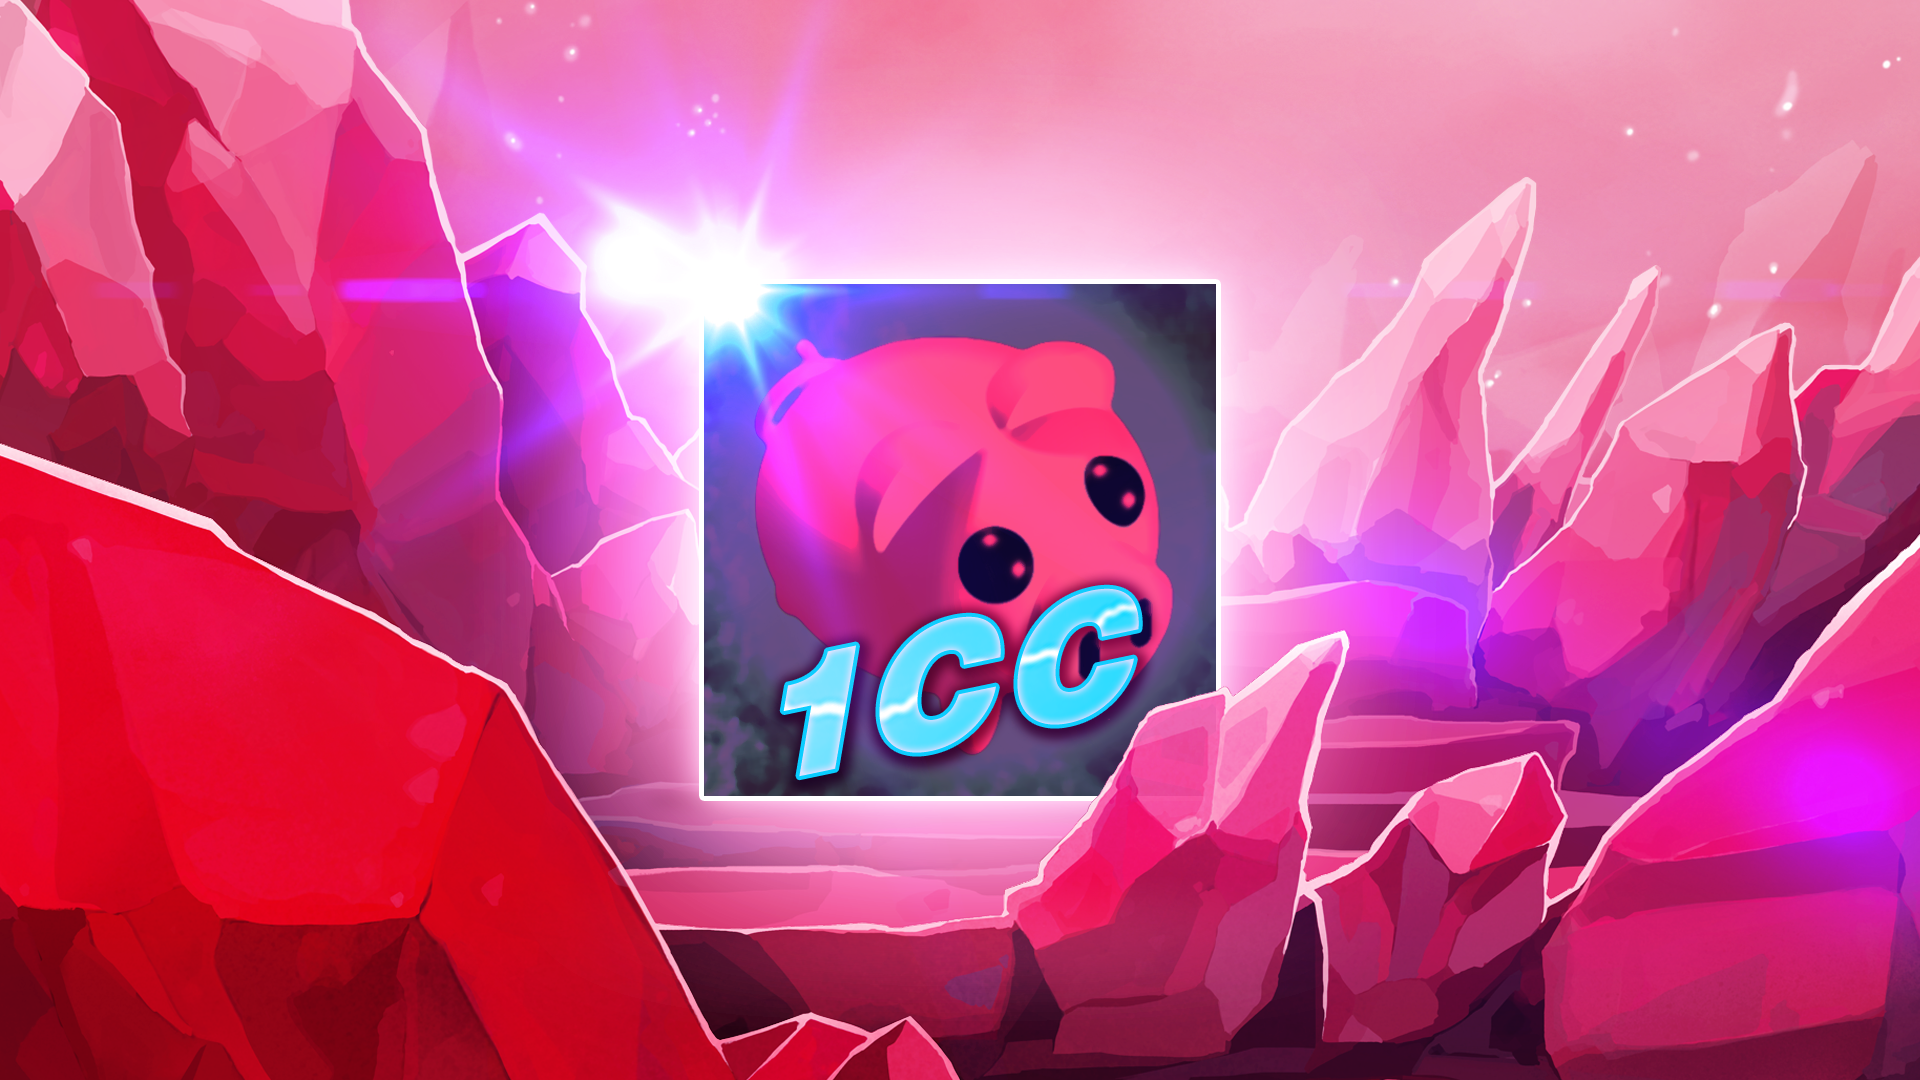 Icon for Pink Pig Mode 1cc